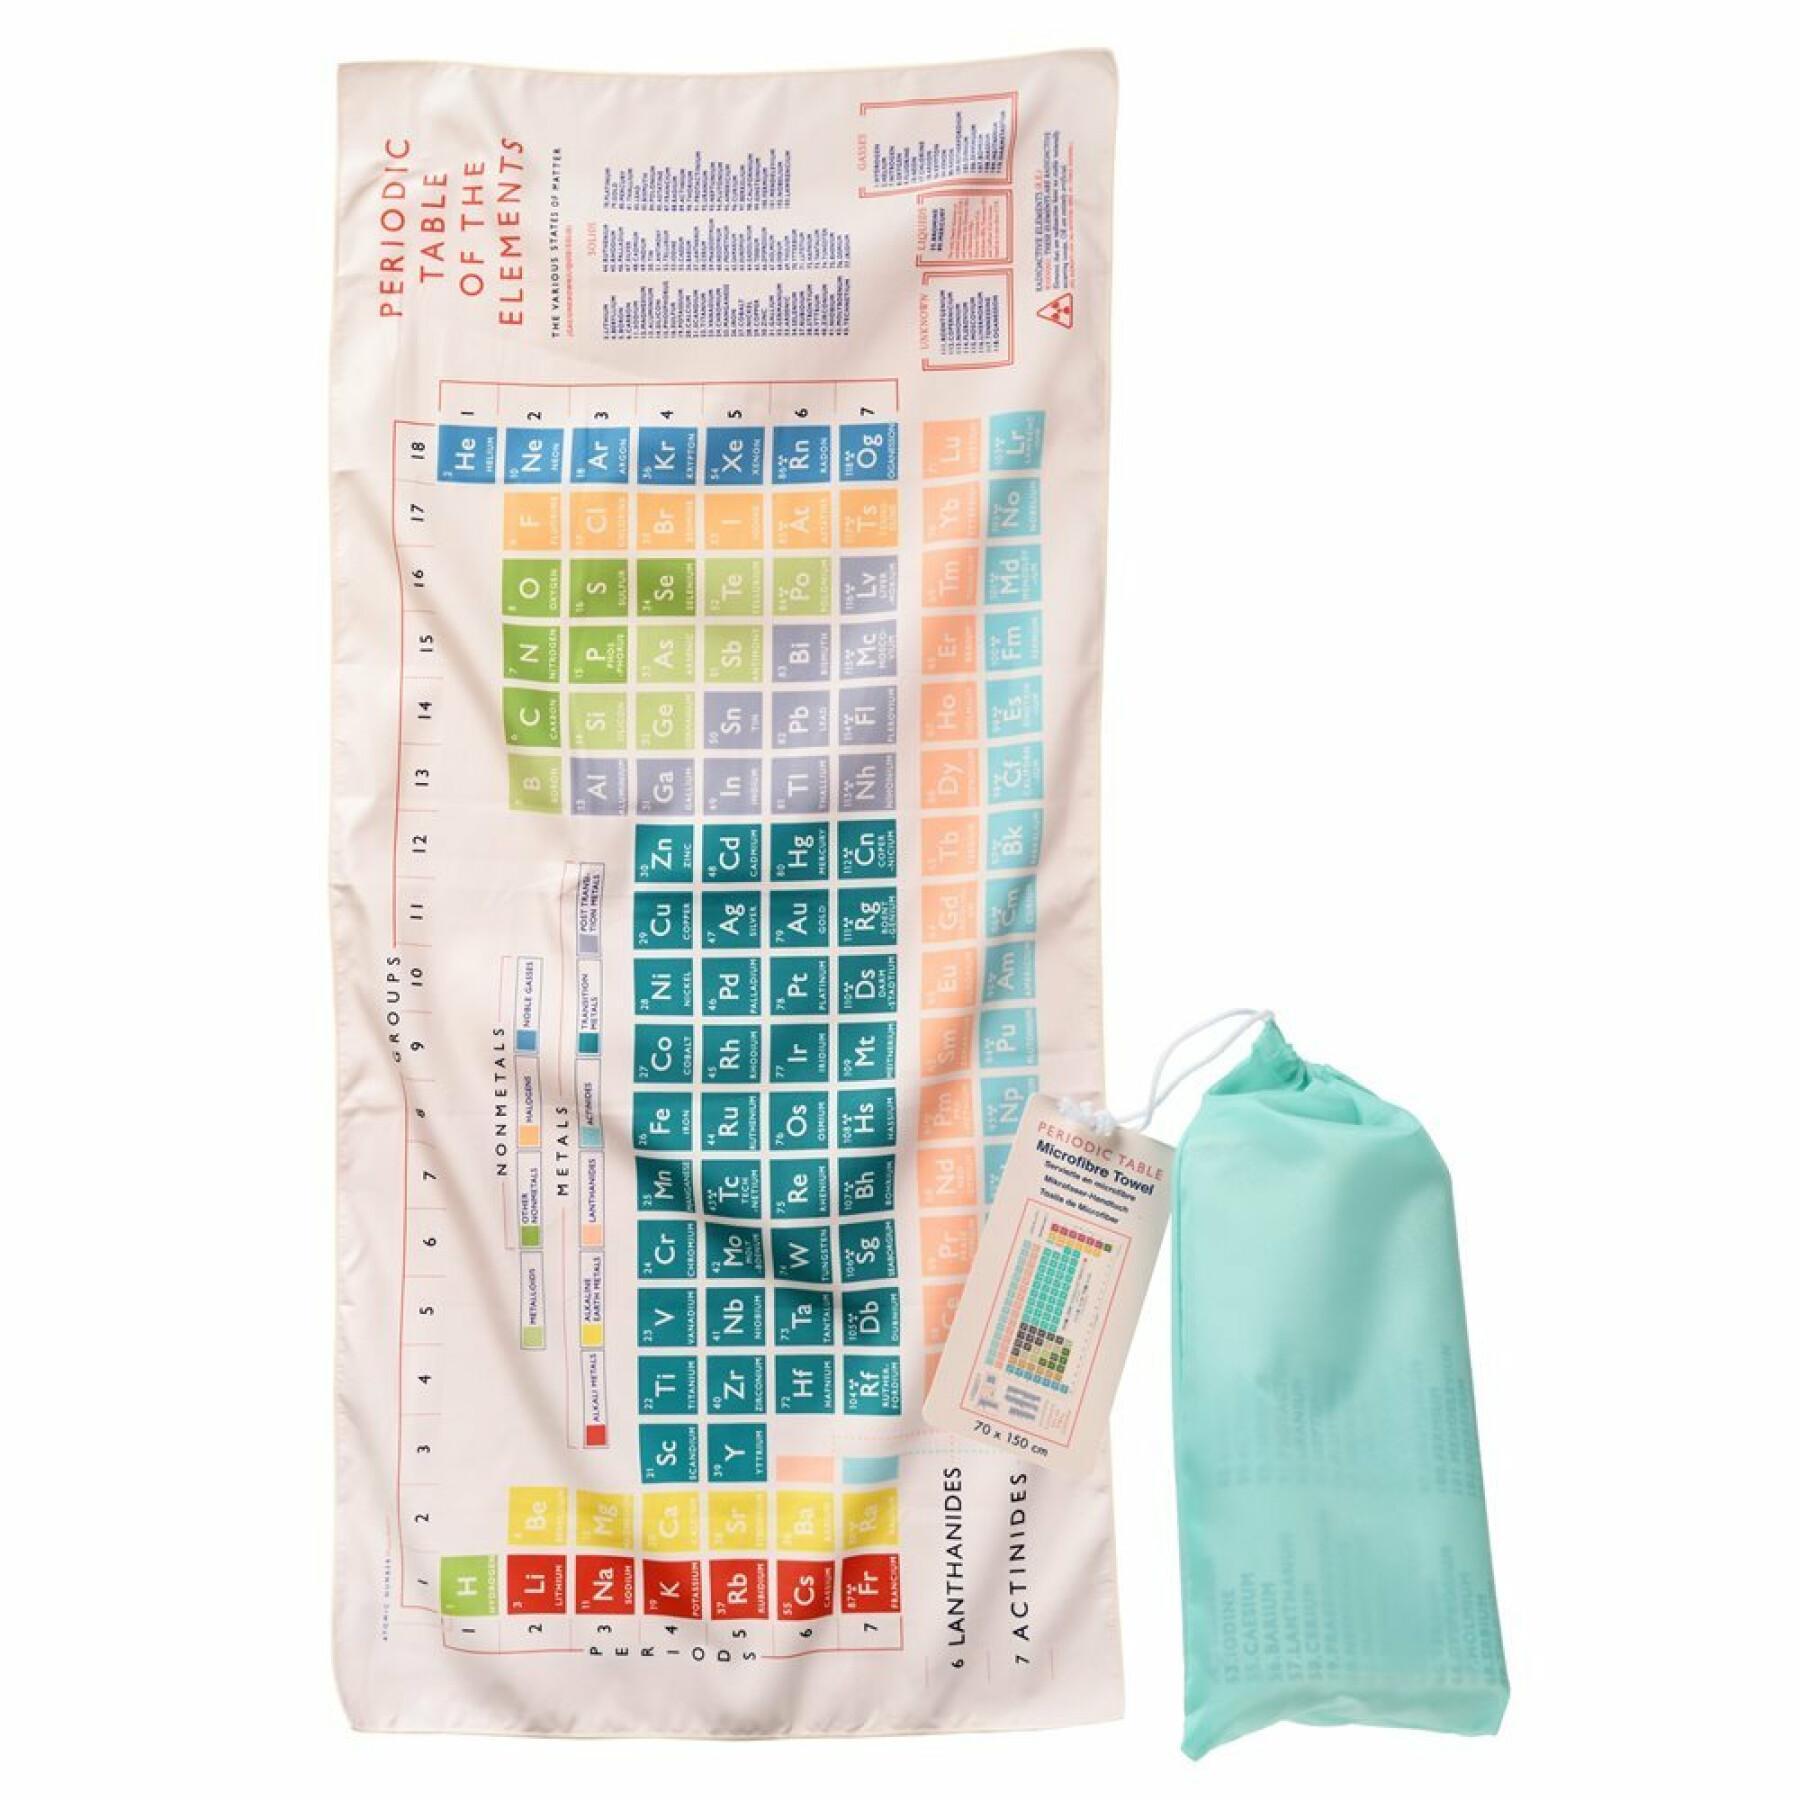 Handtuch aus Mikrofaser Kind Rex London Periodic Table